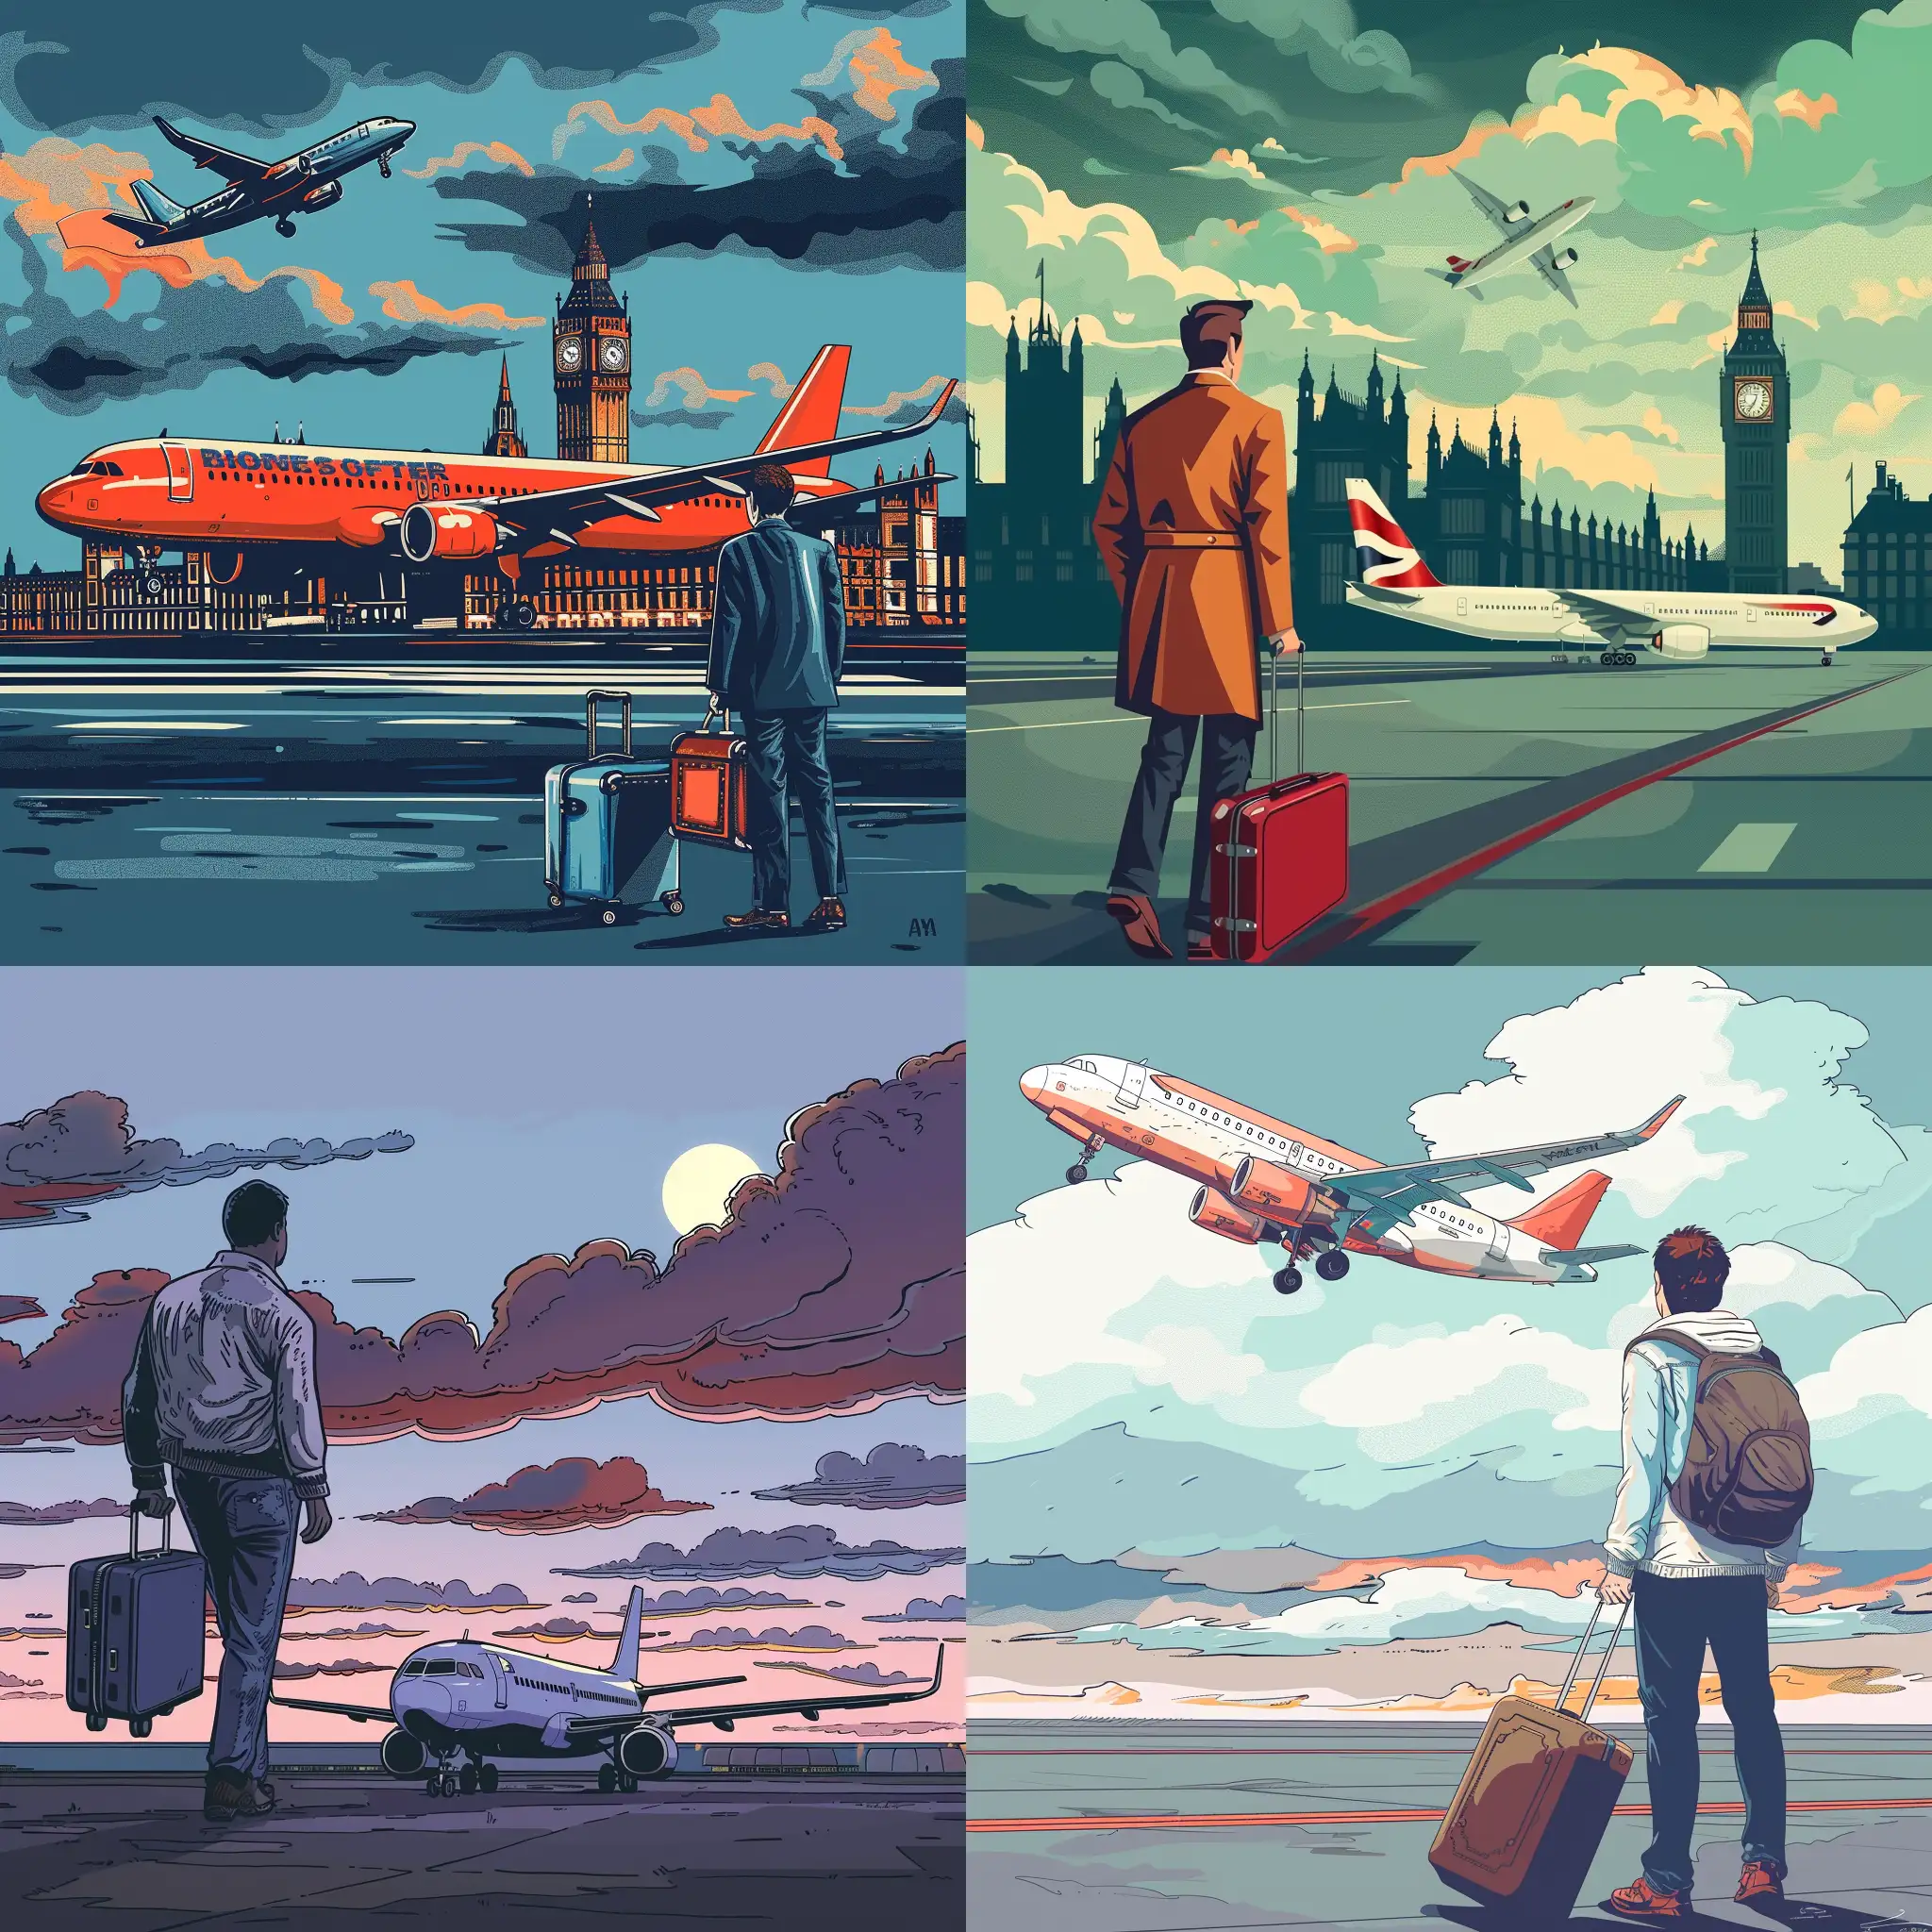 cartoon style, a man left a suitcase on the plane to London.